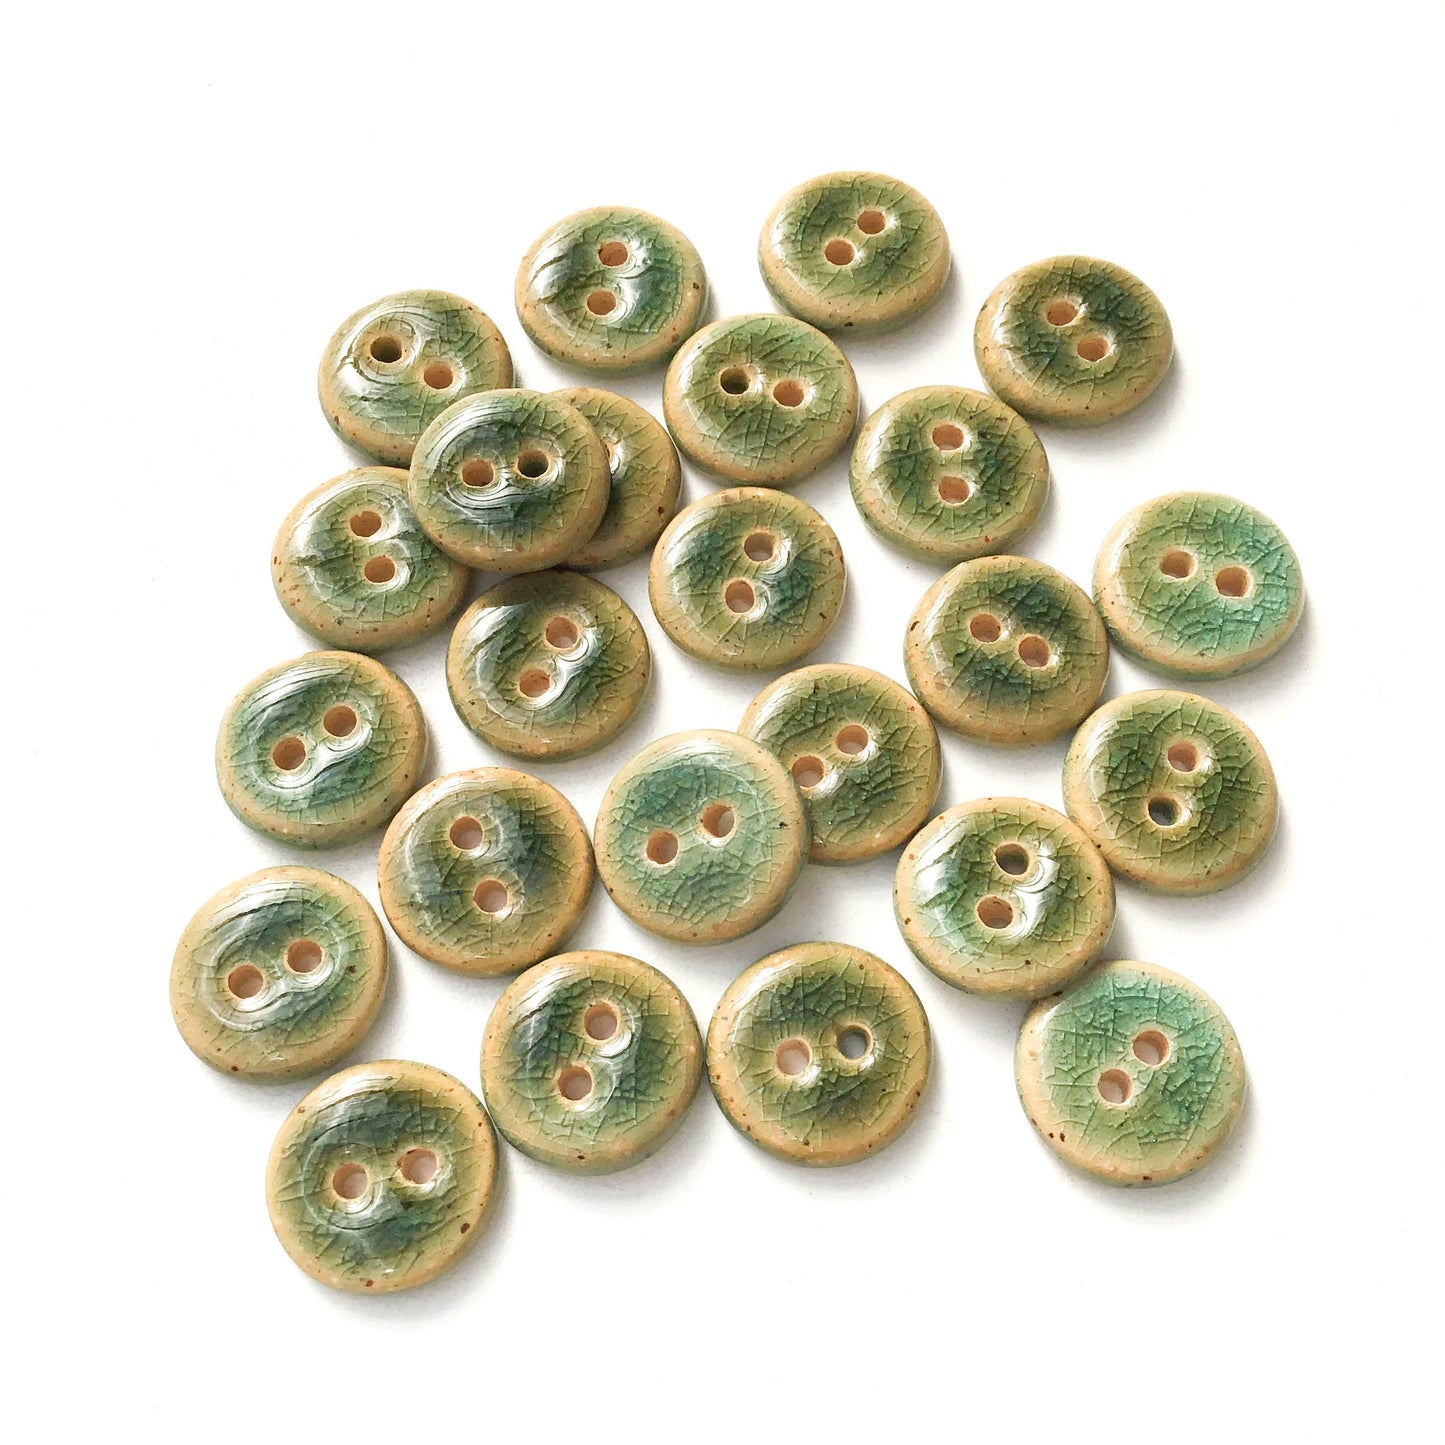 (Wholesale Accounts Only) 9/16" - Blue-Green Crackle on brown clay (ws-11)